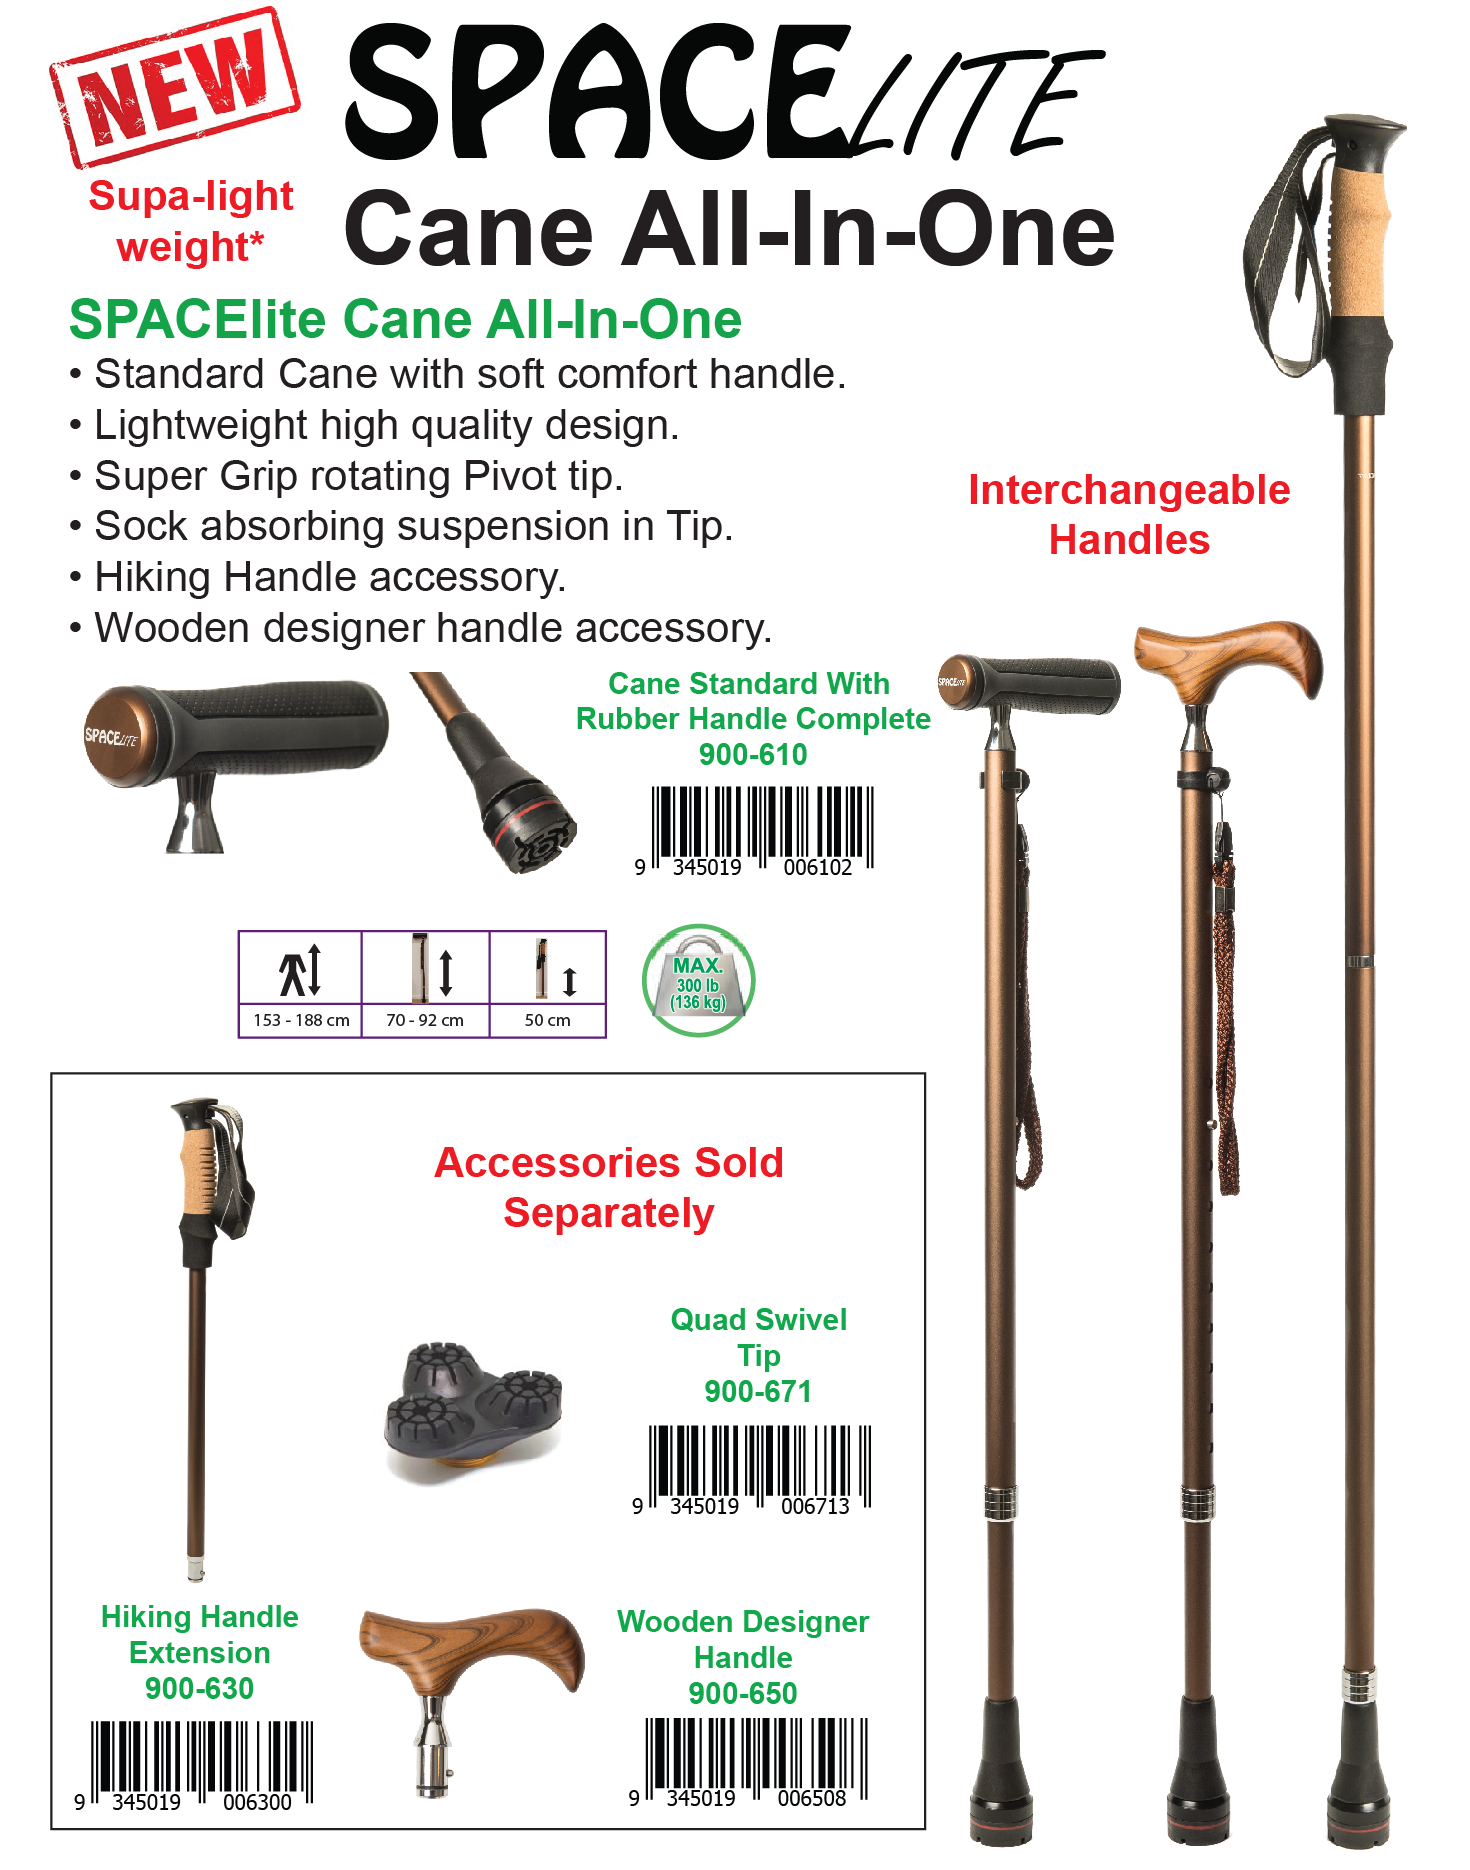 SPACElite Cane All-in-One, Complete with soft handle